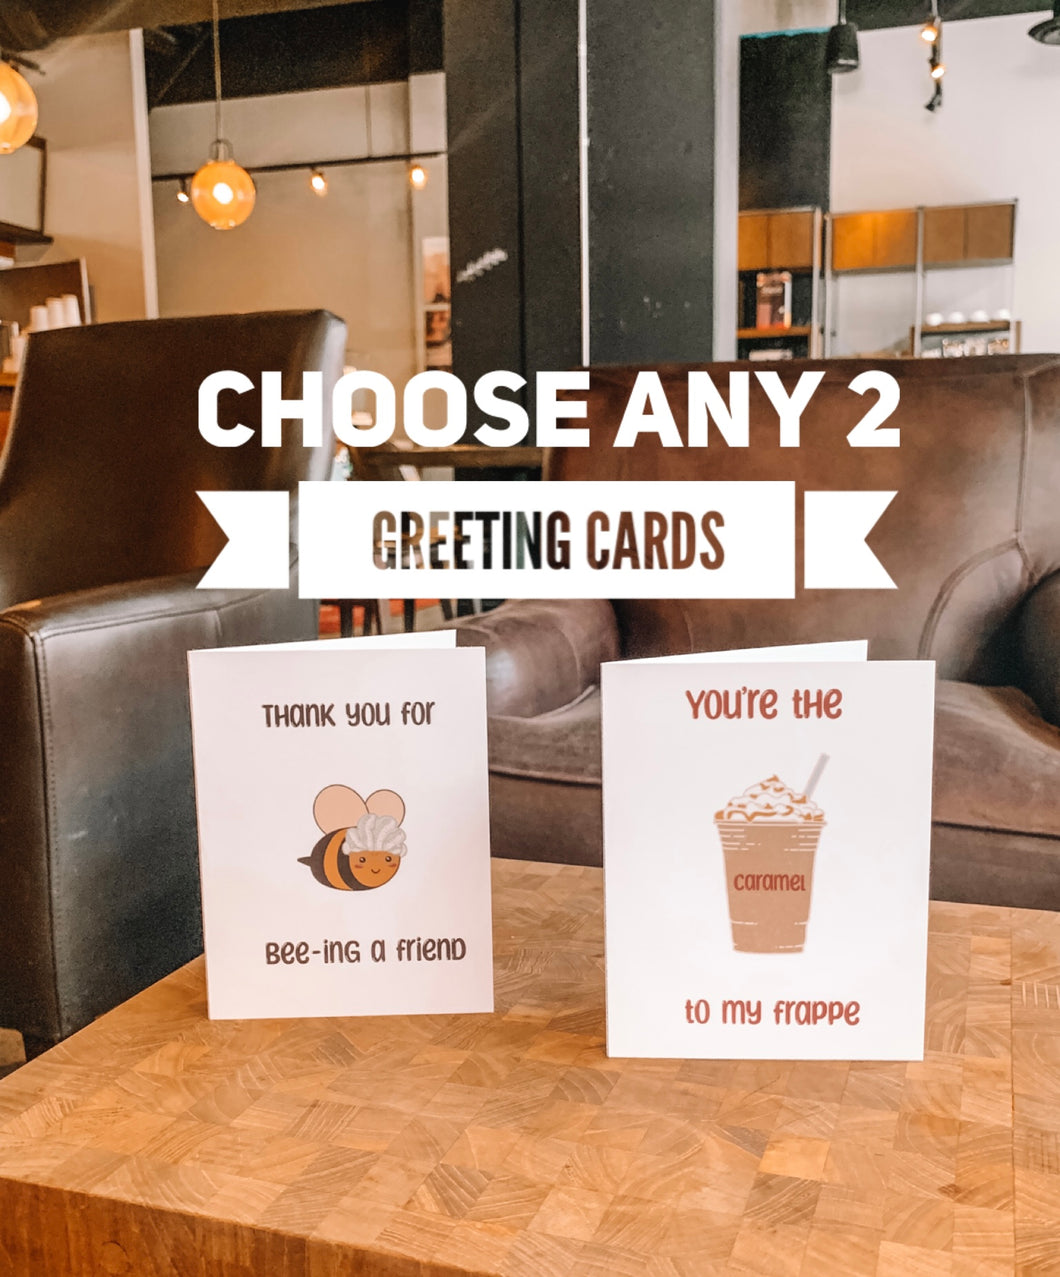 Choose any 2 Greeting Cards